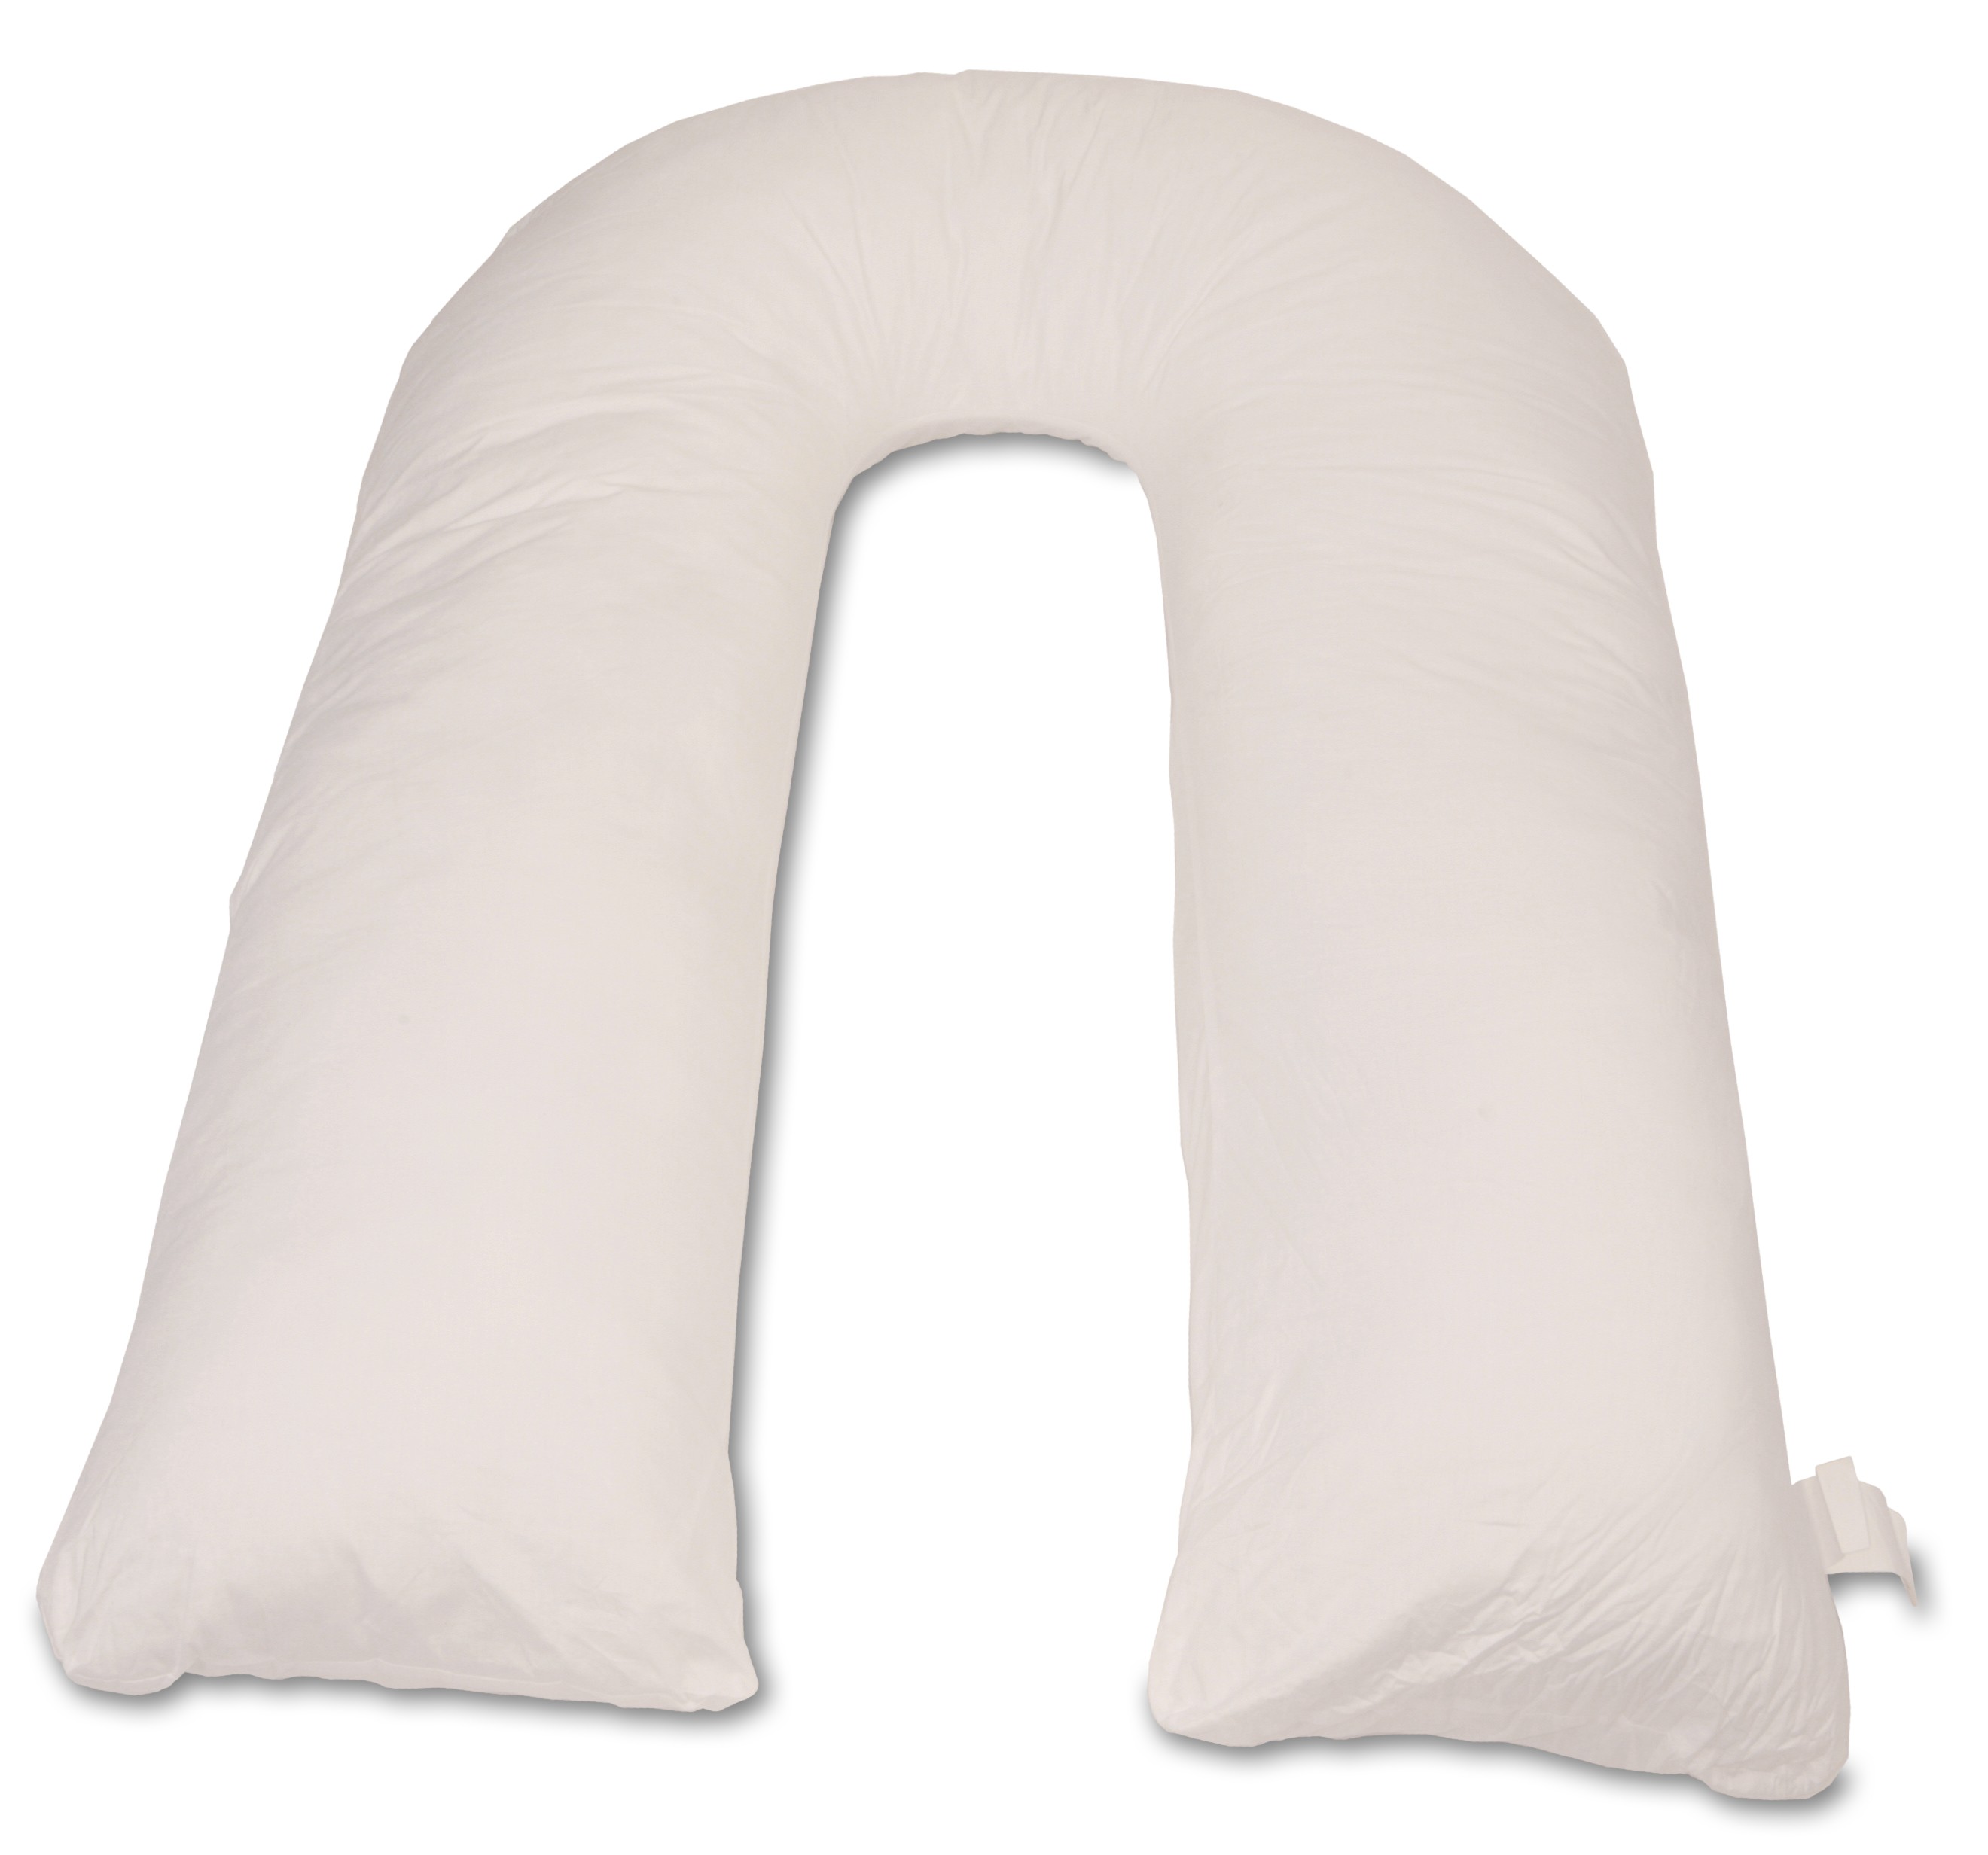 s shaped maternity pillow